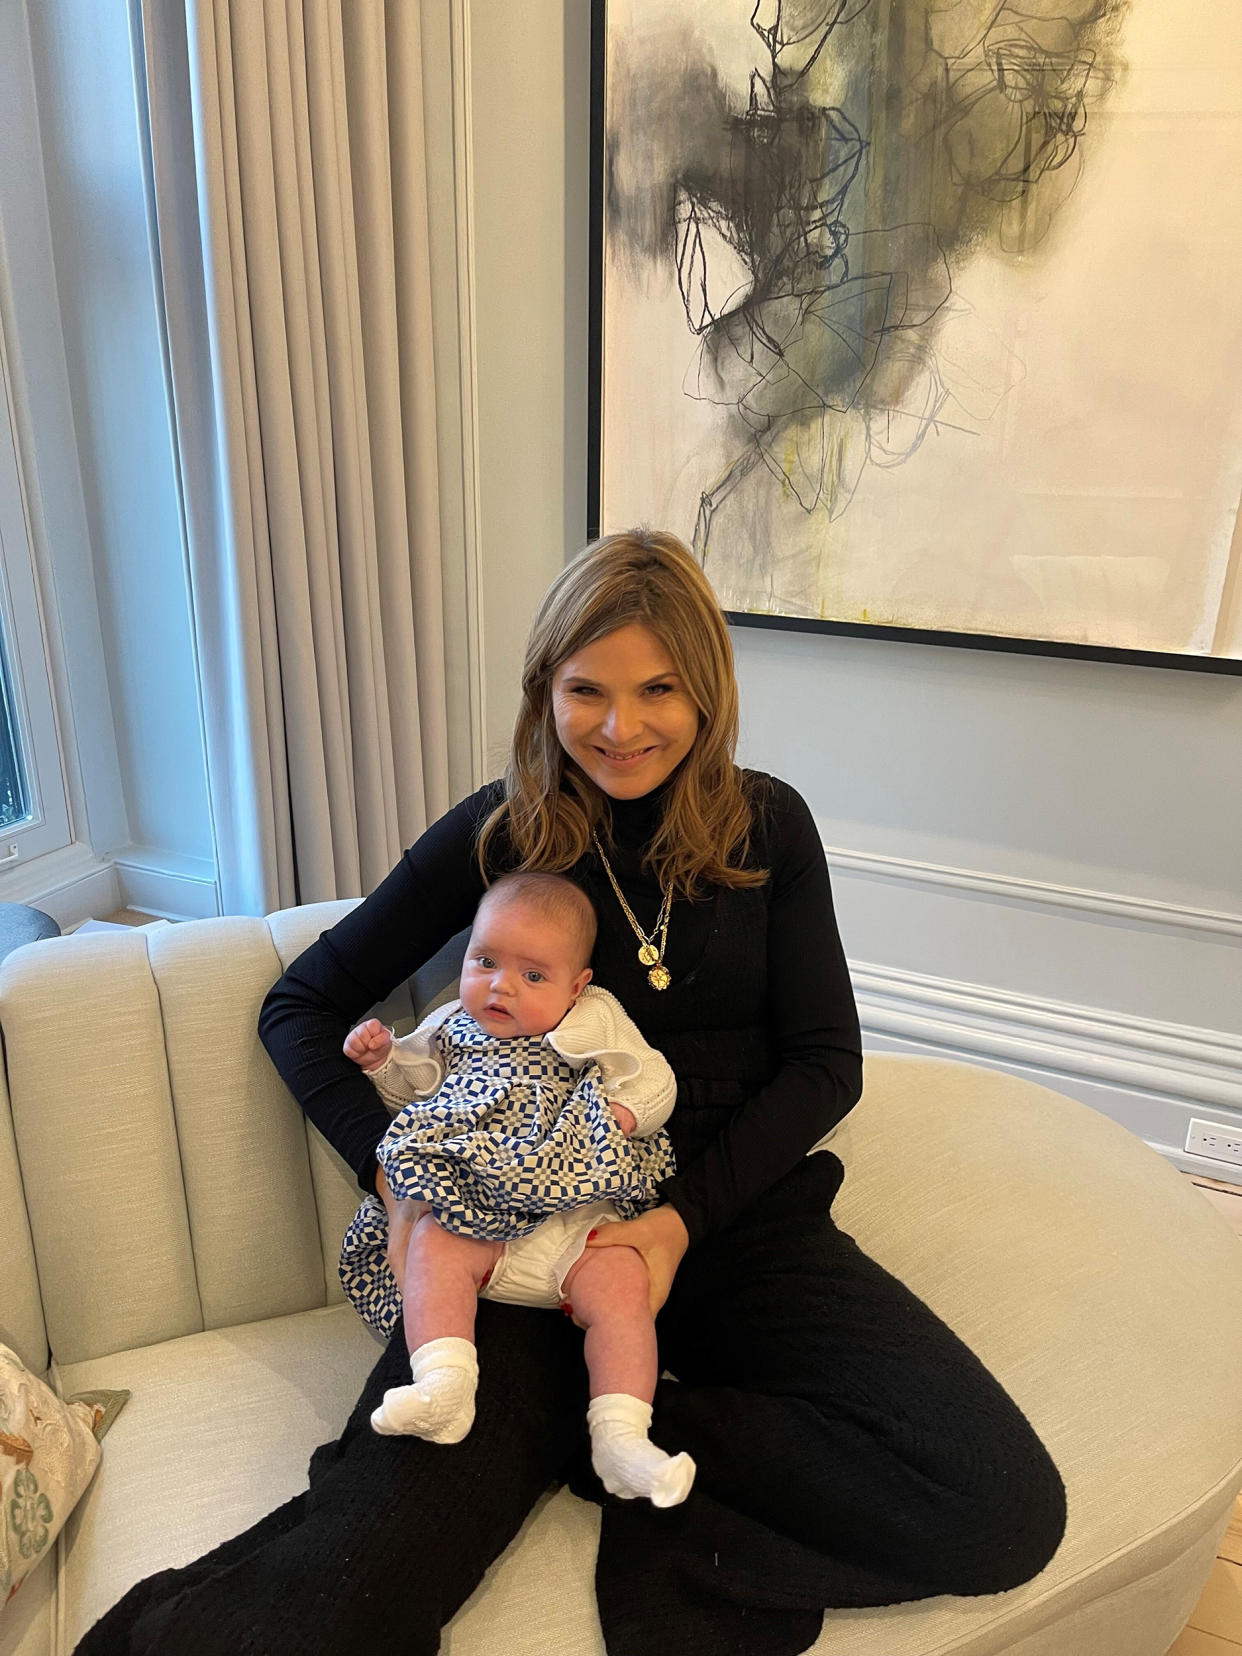 Auntie Jenna spends some time with her baby niece. (Barbara Bush)